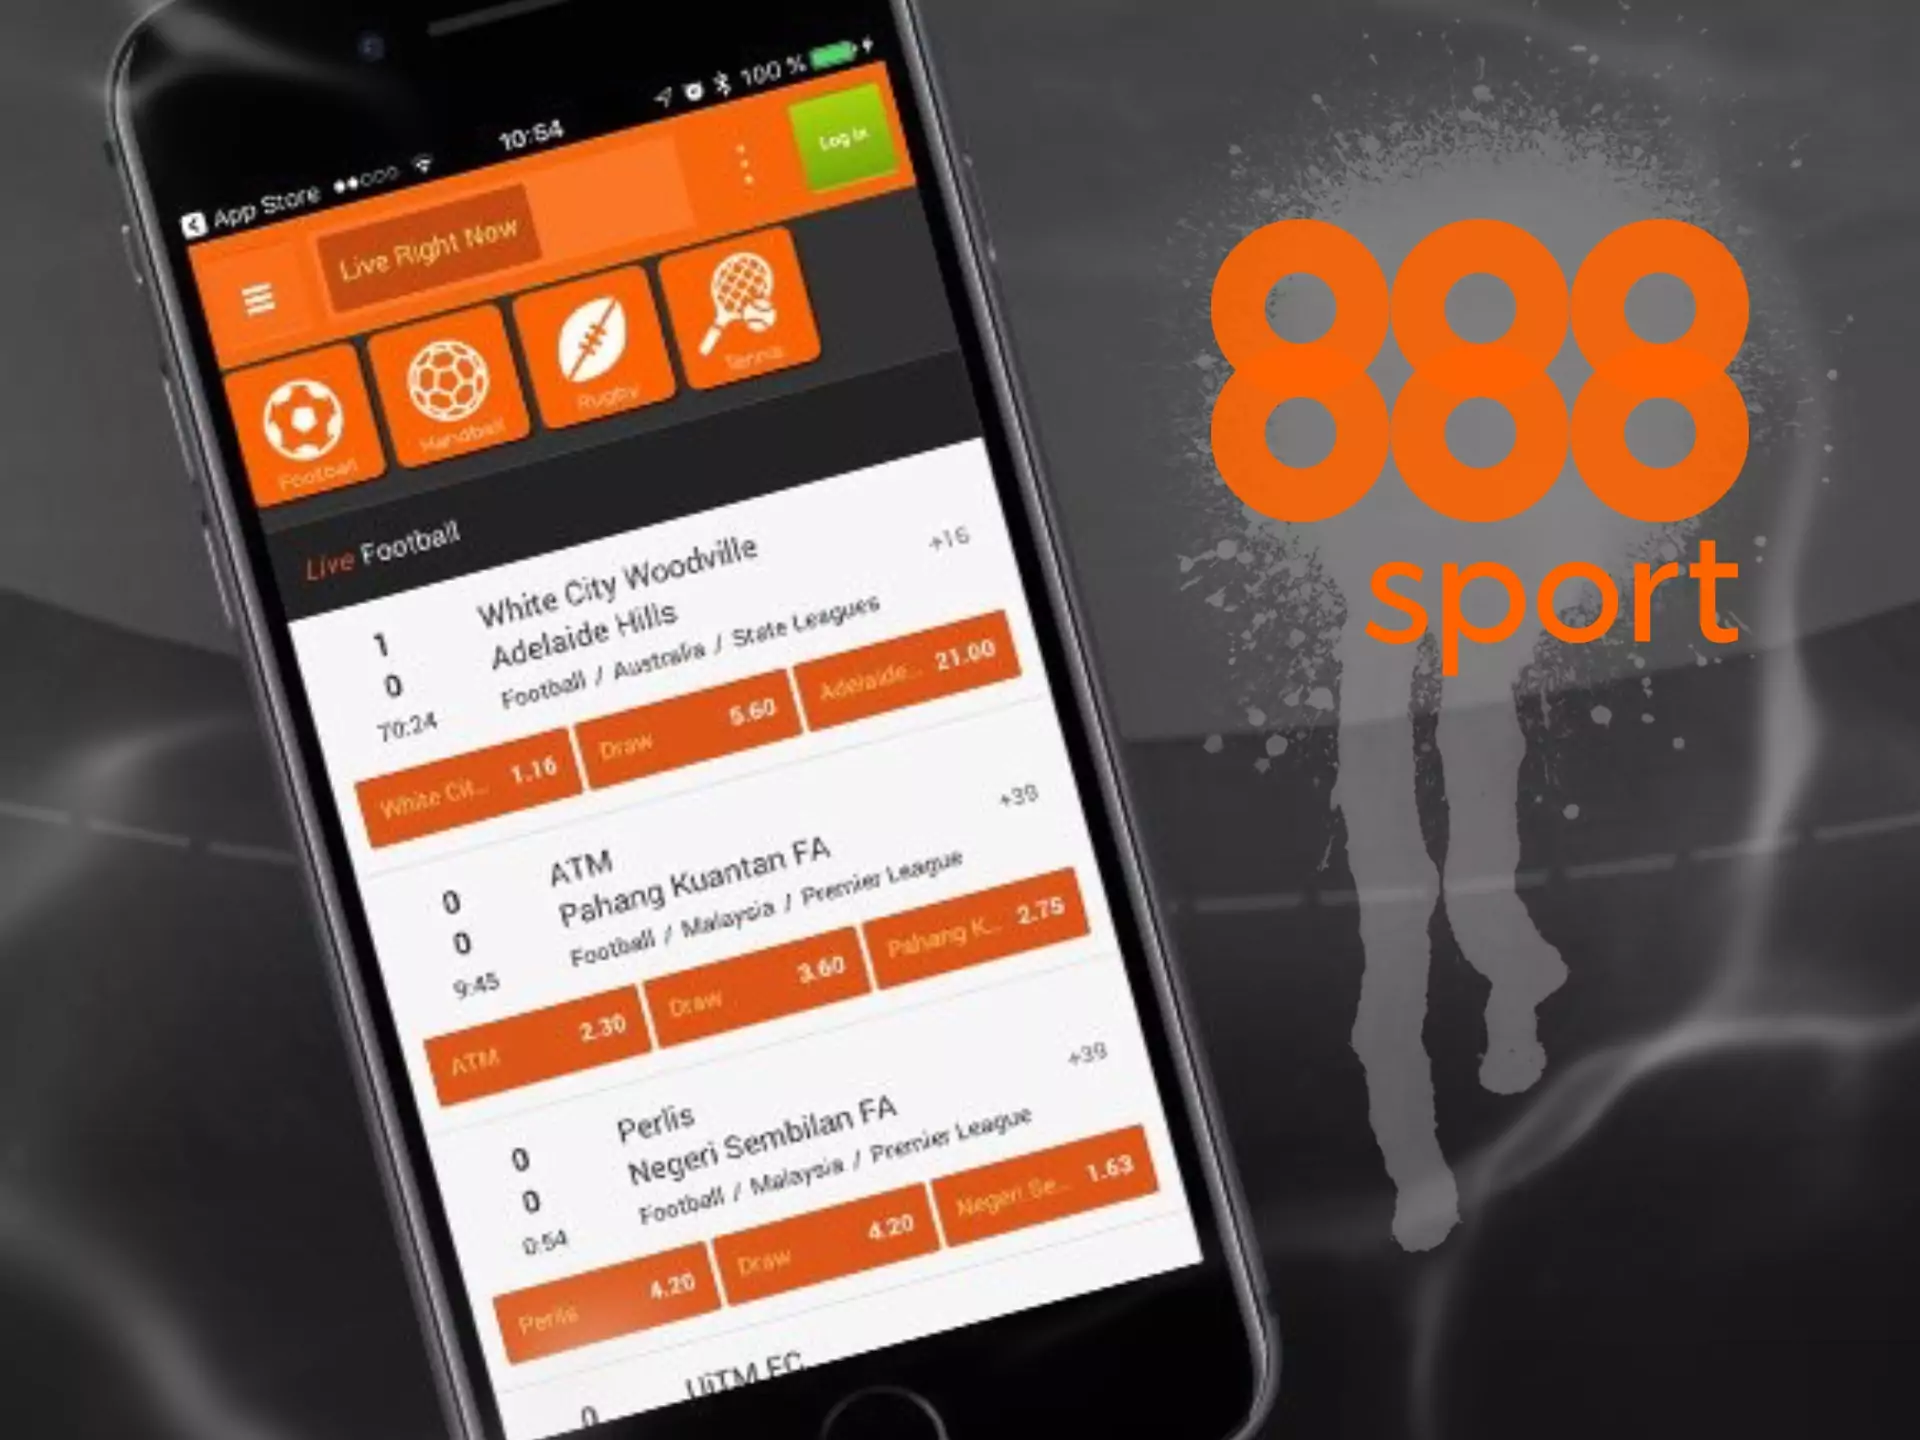 Install the 888sport app and start betting.